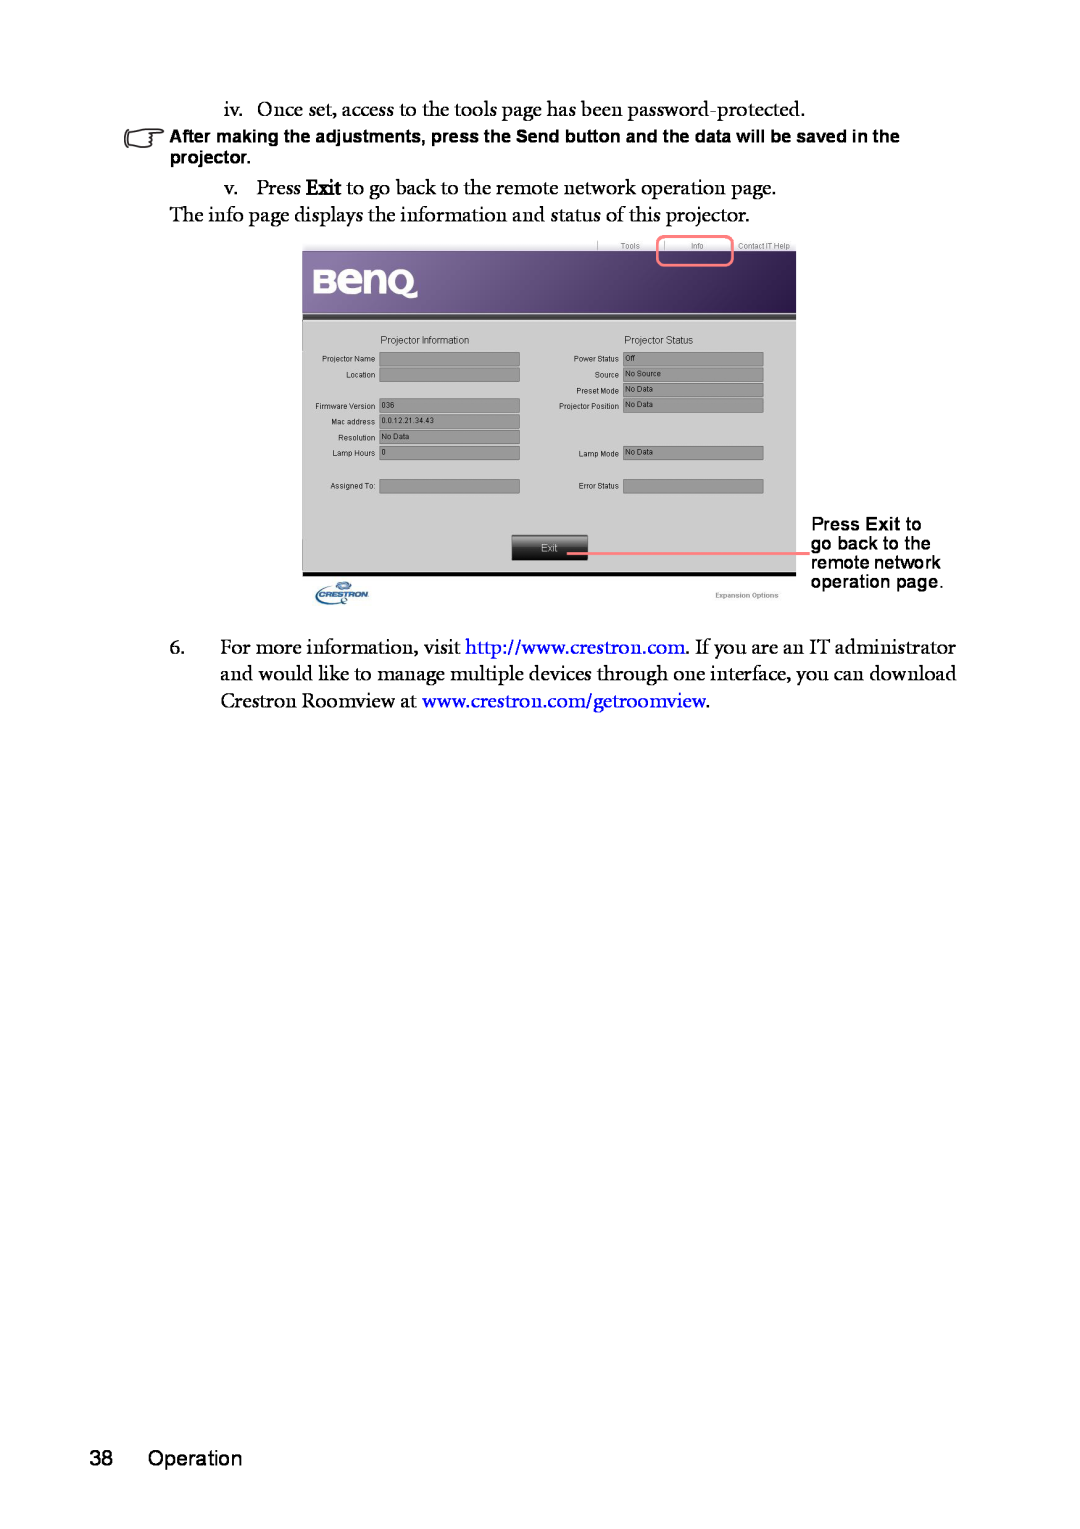 BenQ mw814st user manual iv. Once set, access to the tools page has been password-protected, Operation 